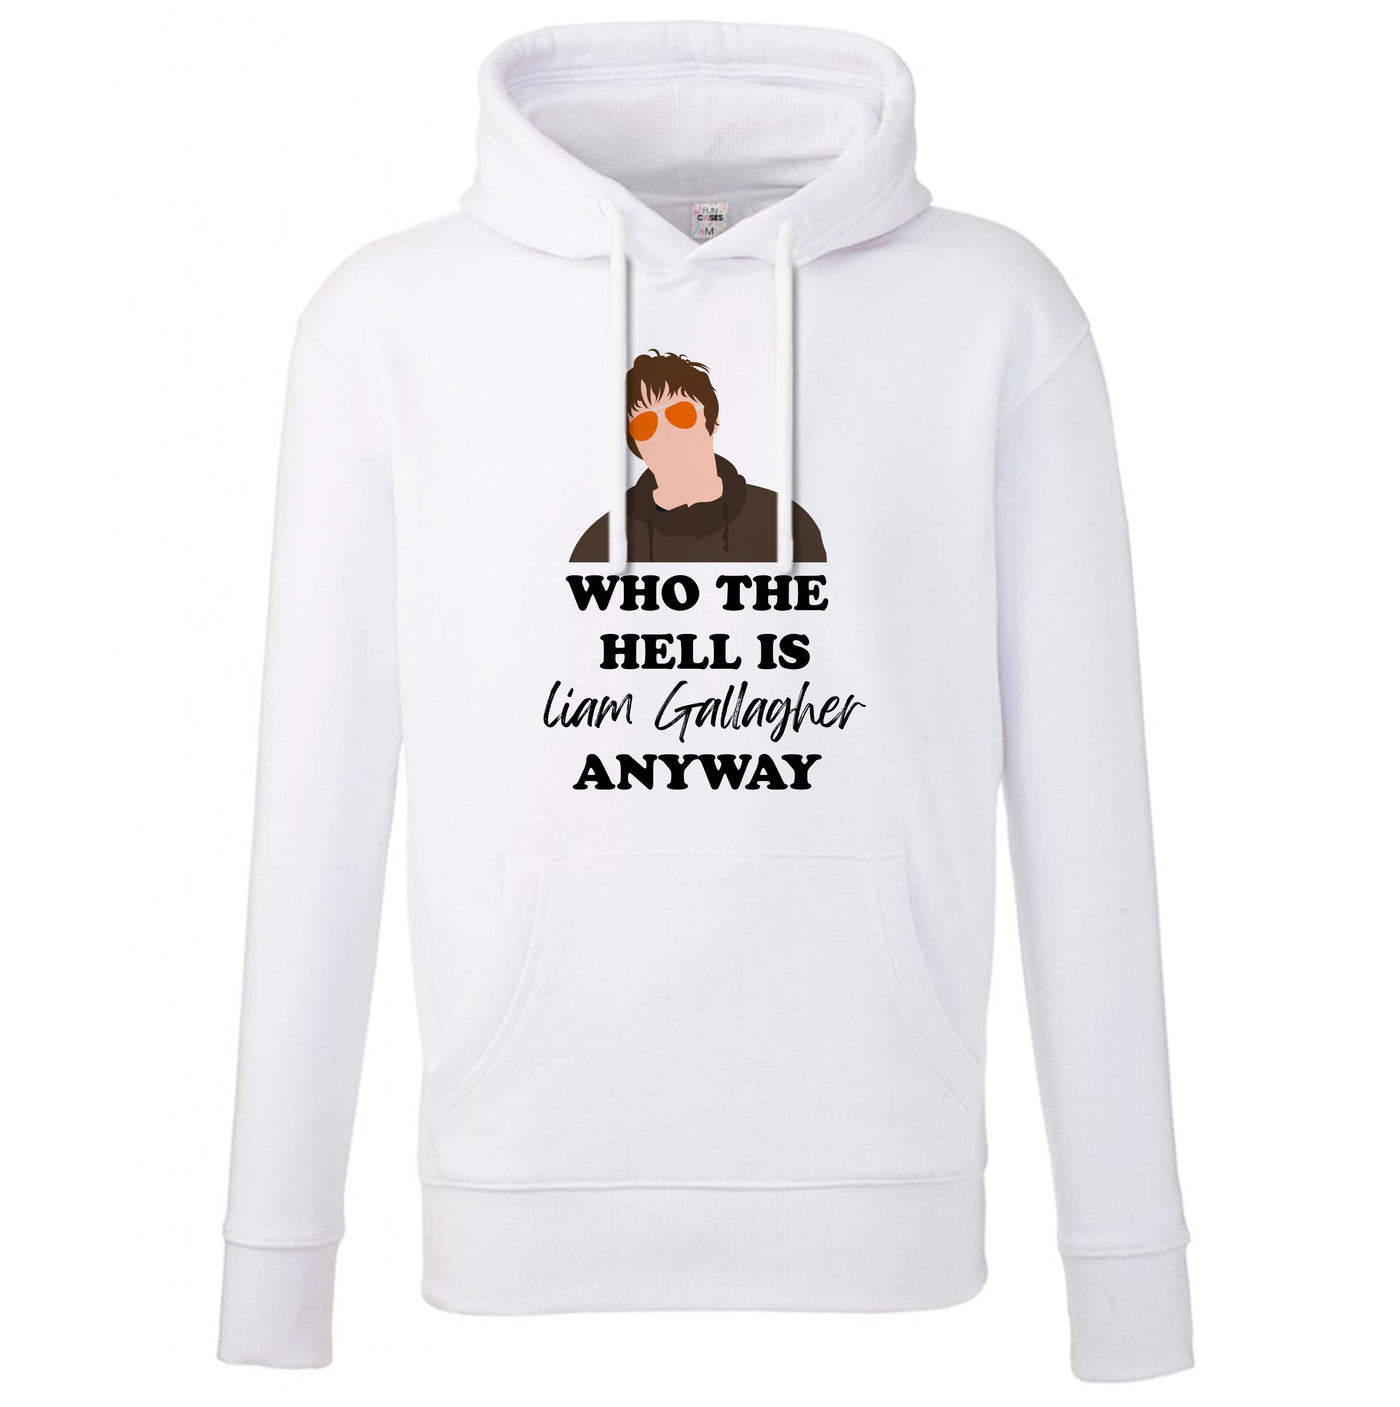 Who The Hell Is Liam Gallagher anyway - Festival Hoodie